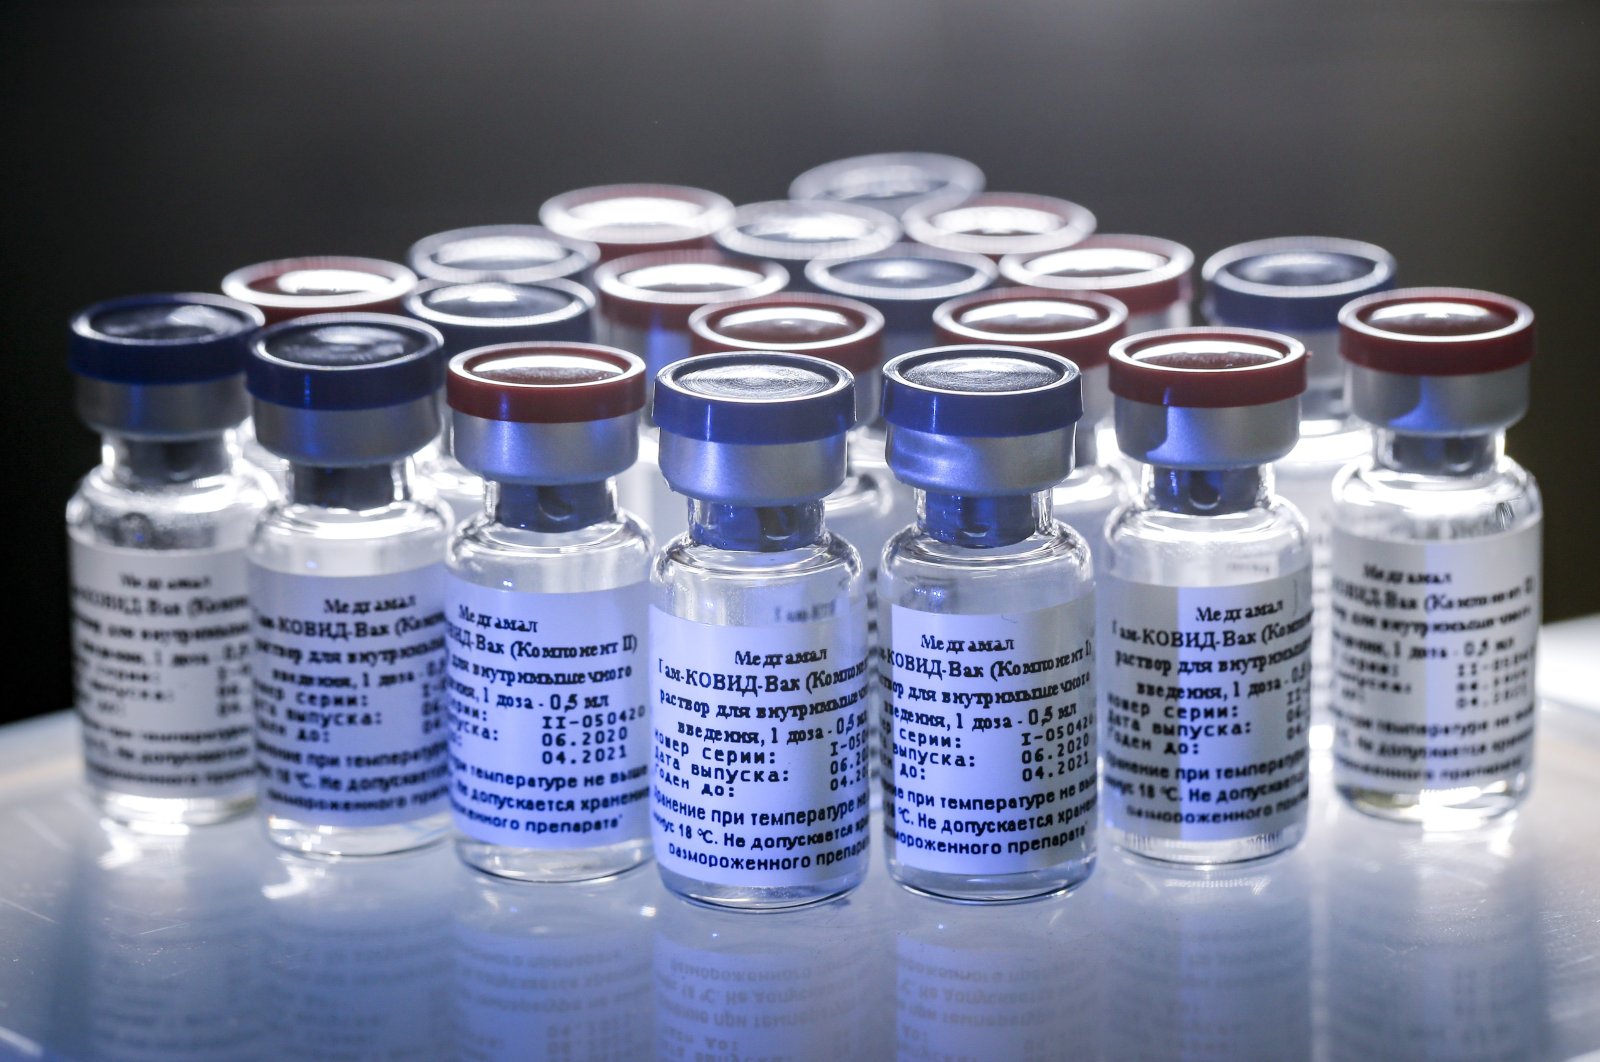 In this handout photo taken on Thursday, Aug. 6, 2020, and provided by Russian Direct Investment Fund, a new vaccine is on display at the Nikolai Gamaleya National Center of Epidemiology and Microbiology in Moscow, Russia. (AP Photo)